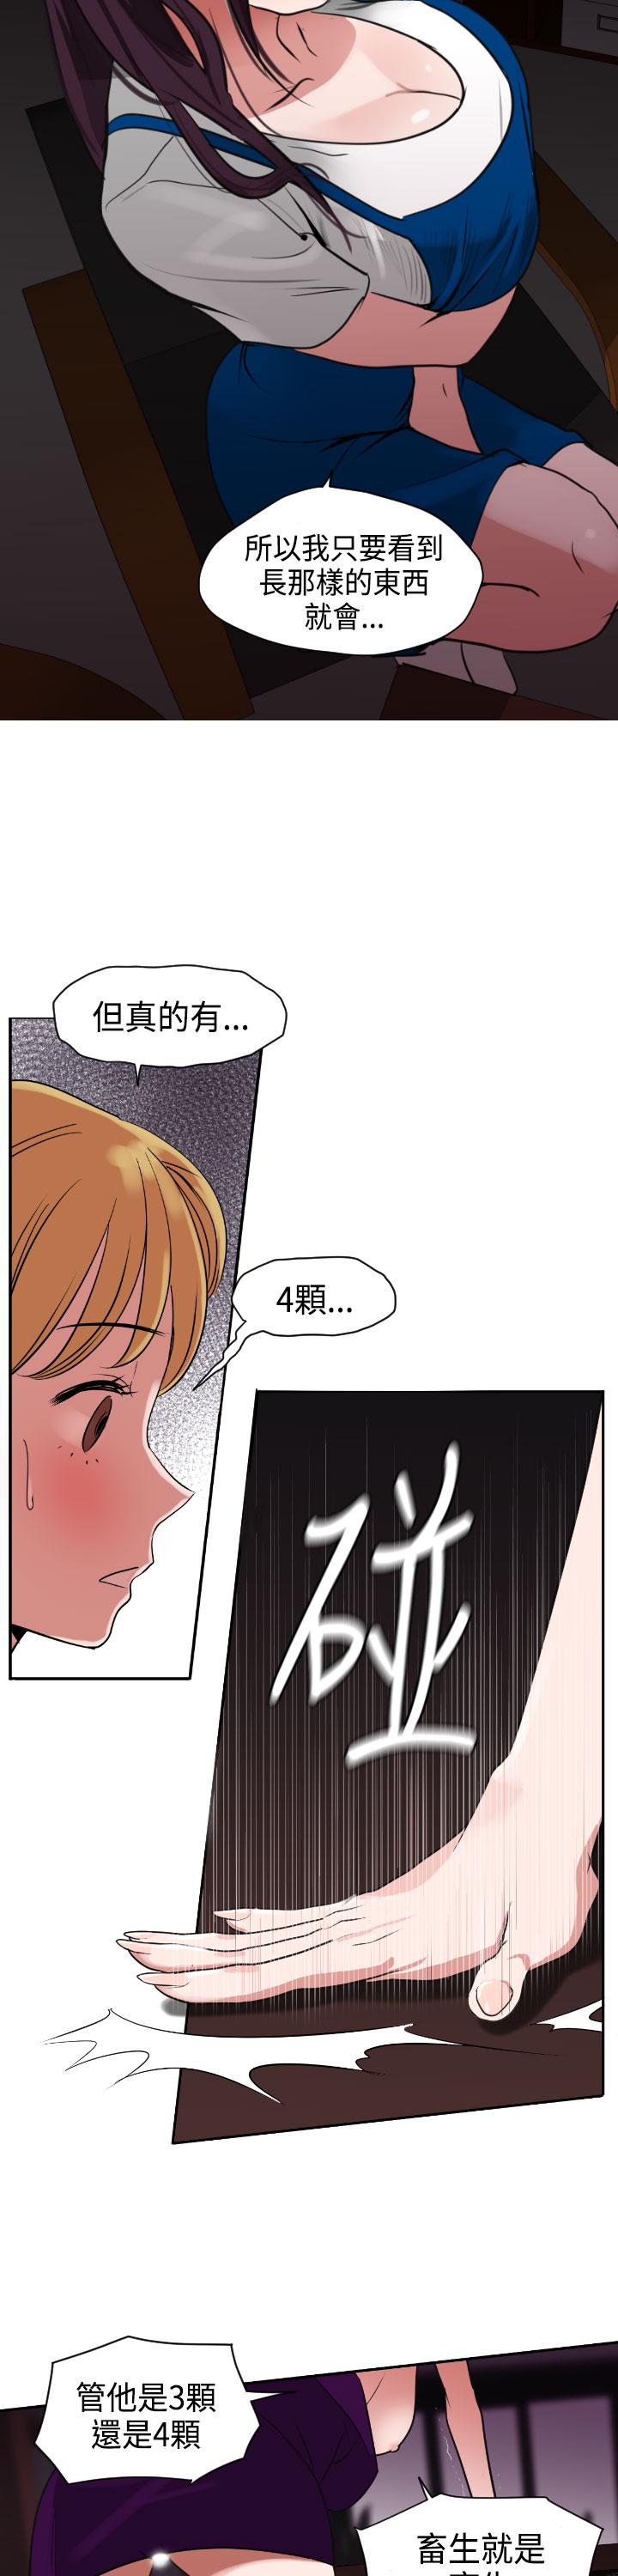 Desire King (慾求王) Ch.1-12 (chinese) 103